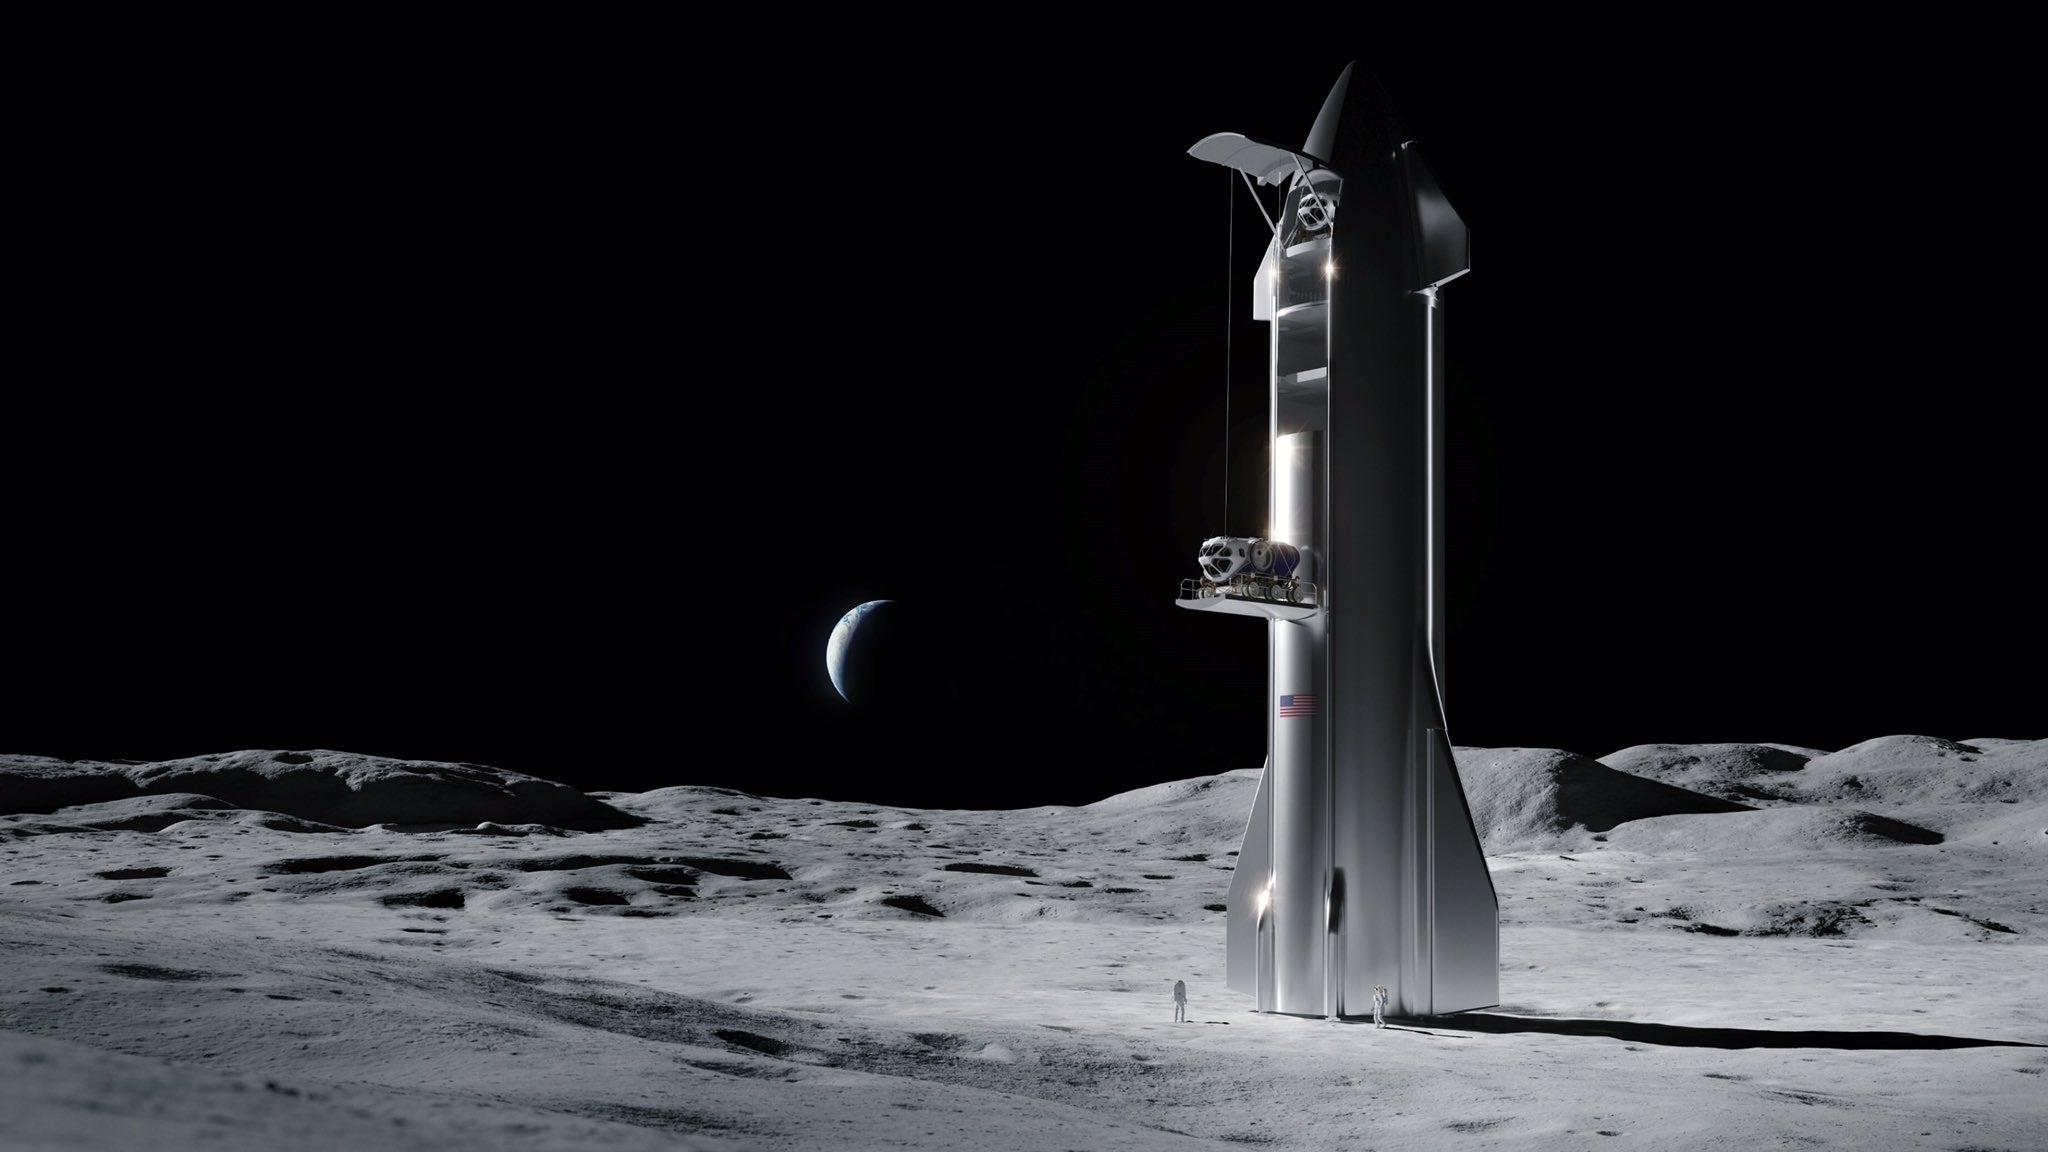 SpaceX Starship may fly NASA cargo to the moon by 2022